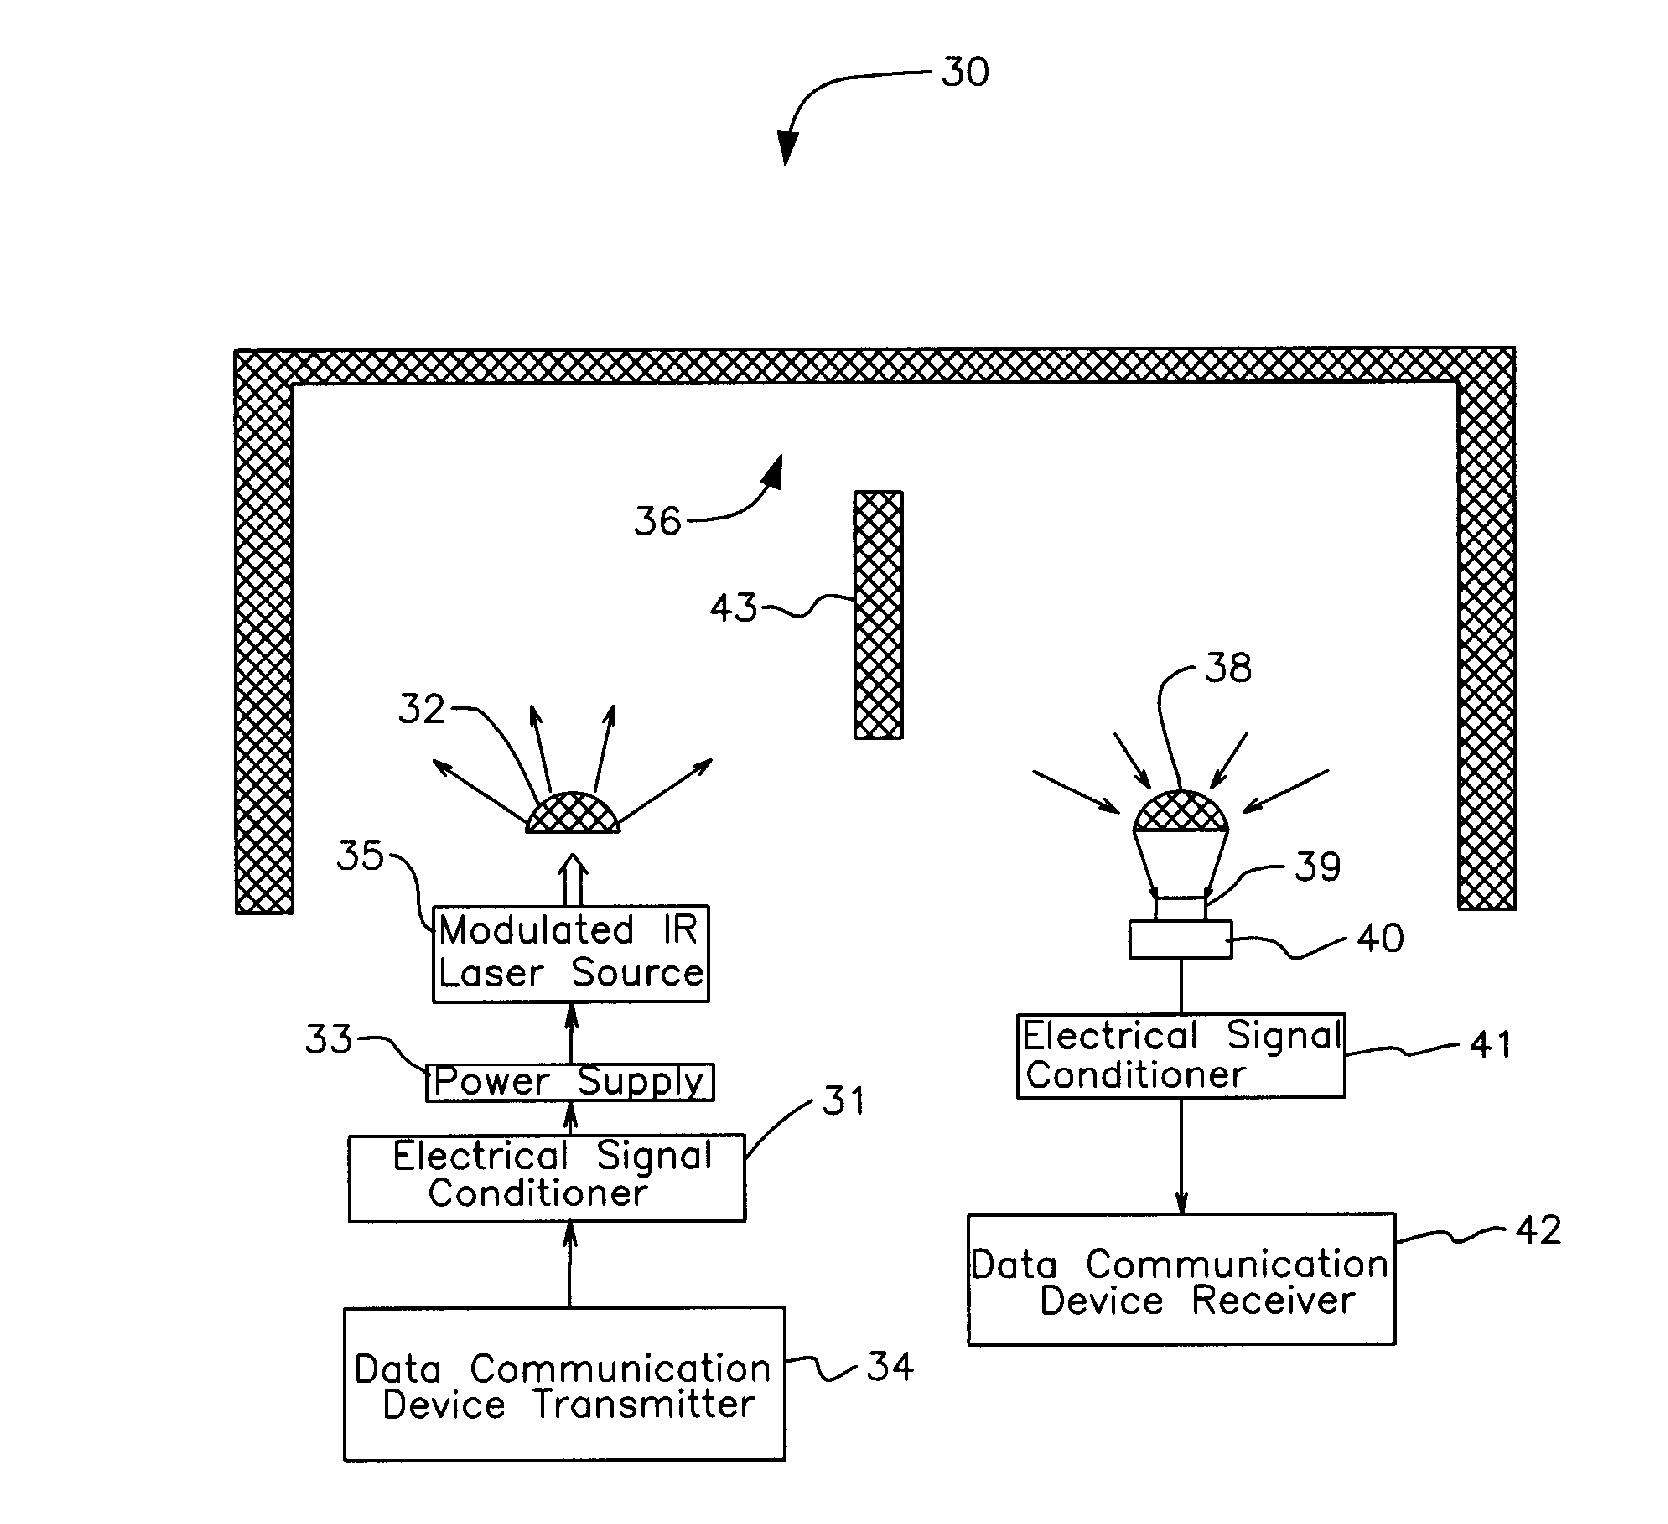 Open-path/free-space optical communication system and method using reflected or backscattered light